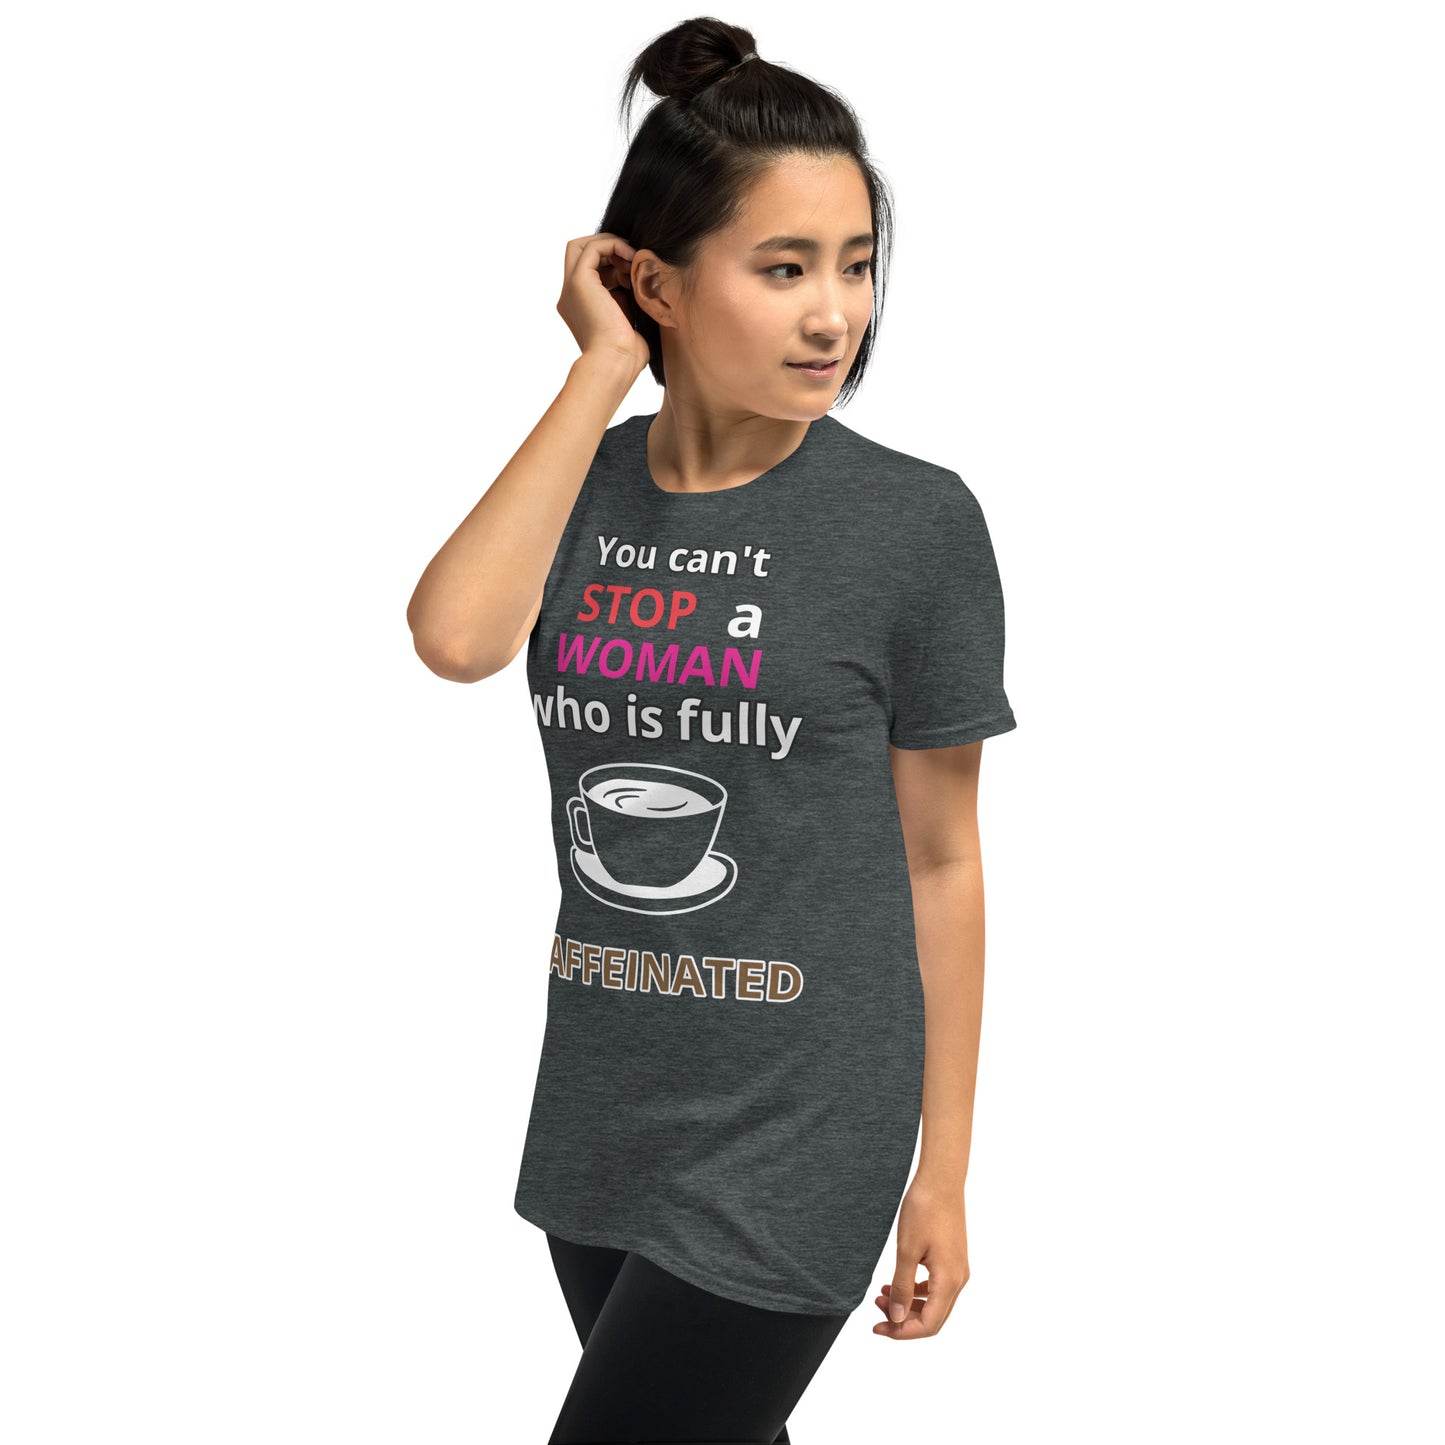 YOU  CAN'T STOP A WOMAN - Short-Sleeve Unisex T-Shirt